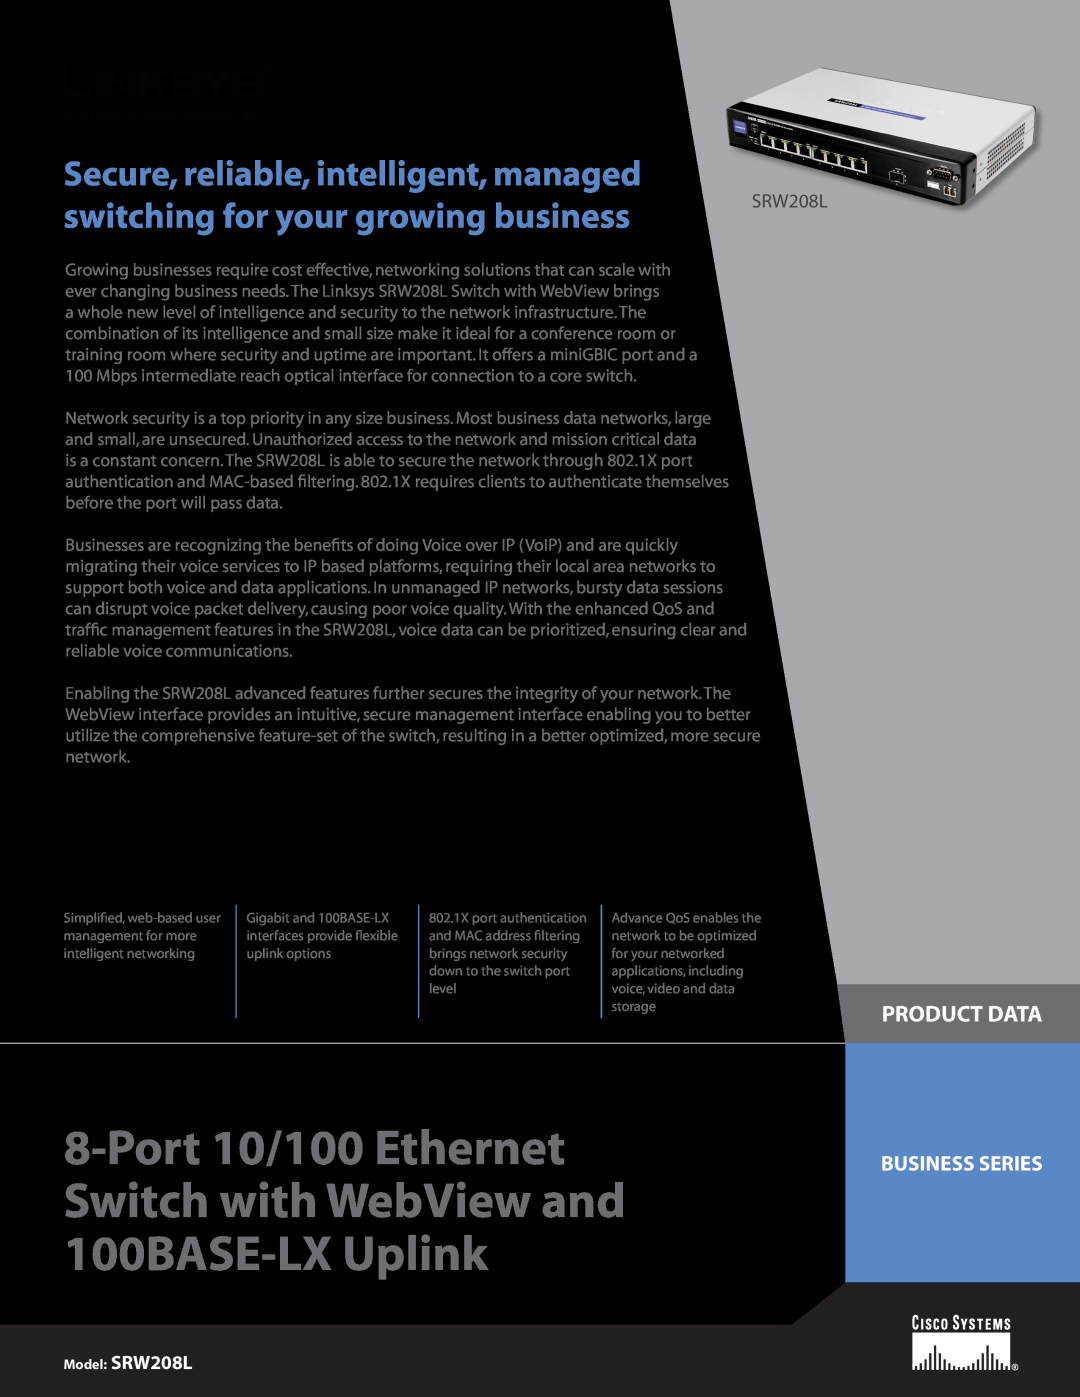 Linksys SRW208L manual Product Data, Business Series, Port 10/100 Ethernet Switch with WebView and 100BASE-LX Uplink 